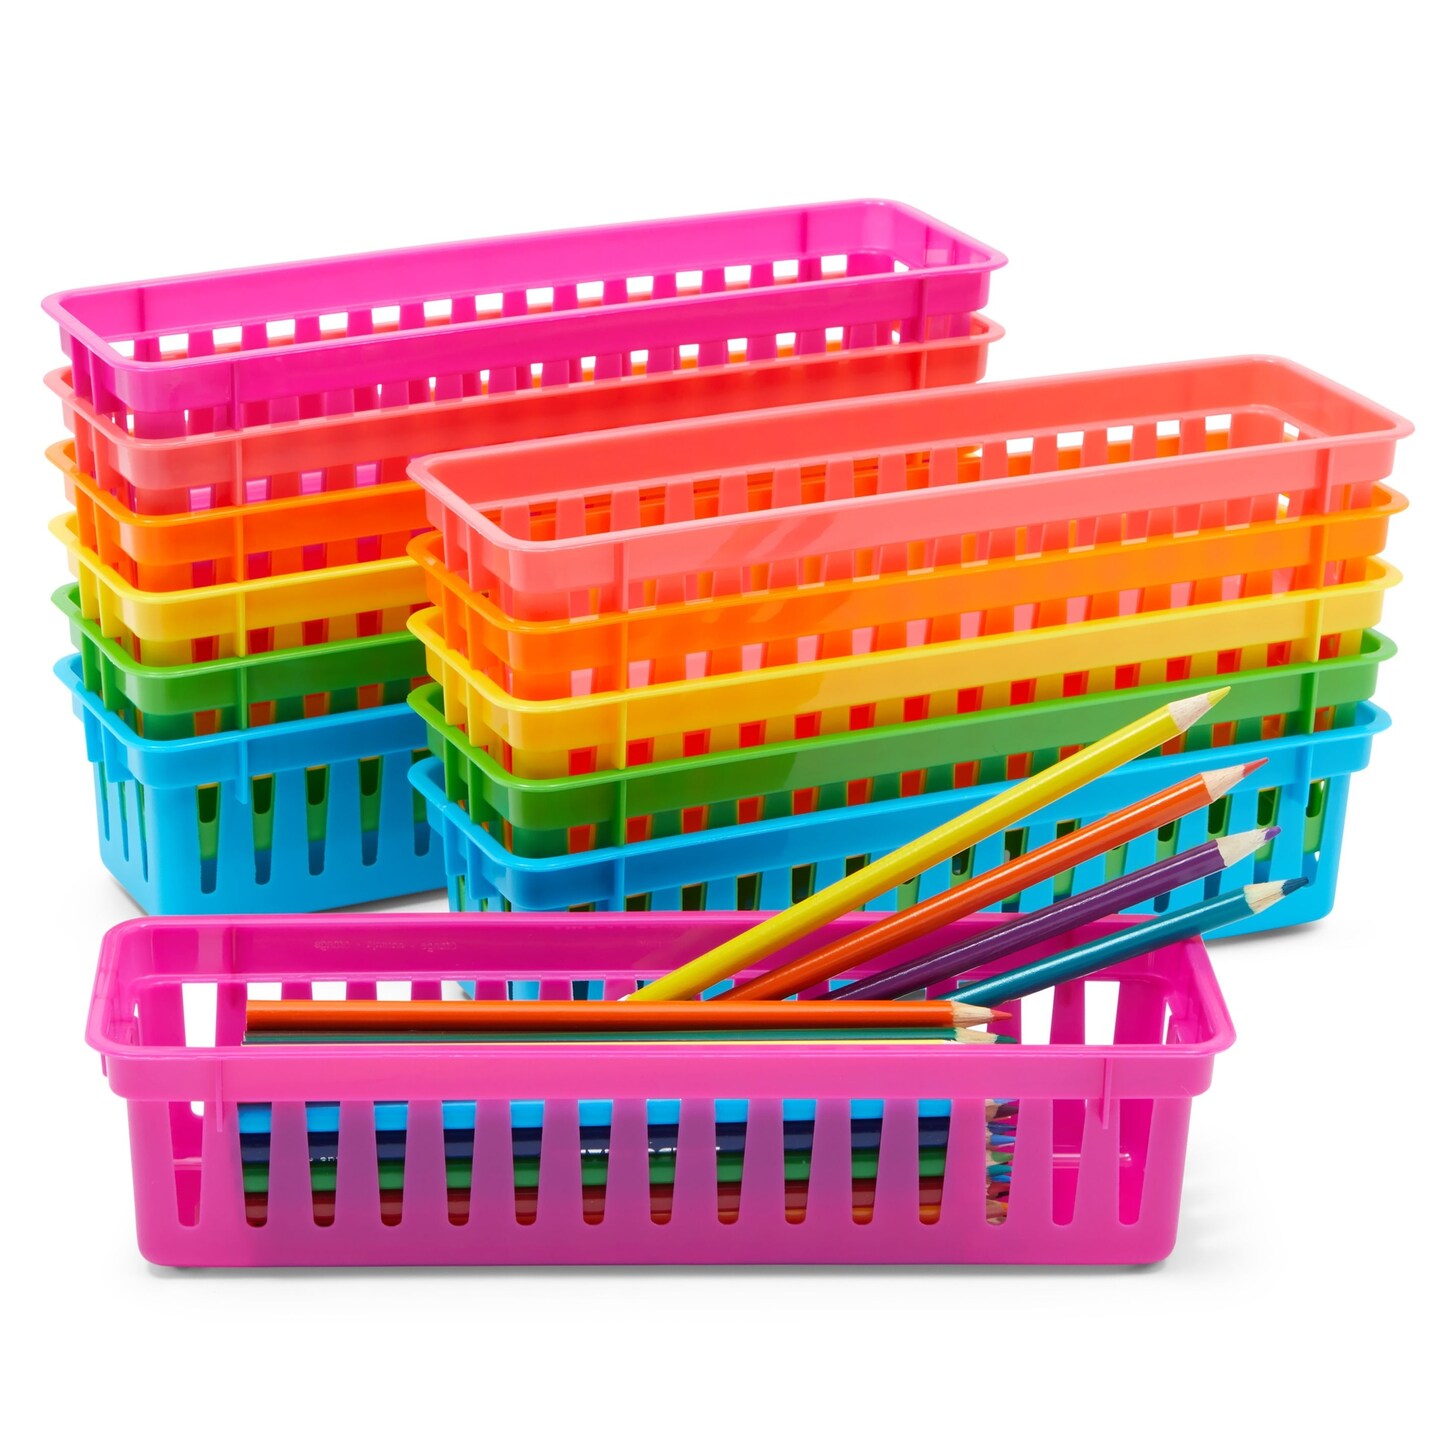 12 Pack Small Pencil Holder Tray for Kids Desks, Colorful Organizer Baskets  for Classroom Supplies, Rainbow (10.0 x 2.9 x 2.4 In)